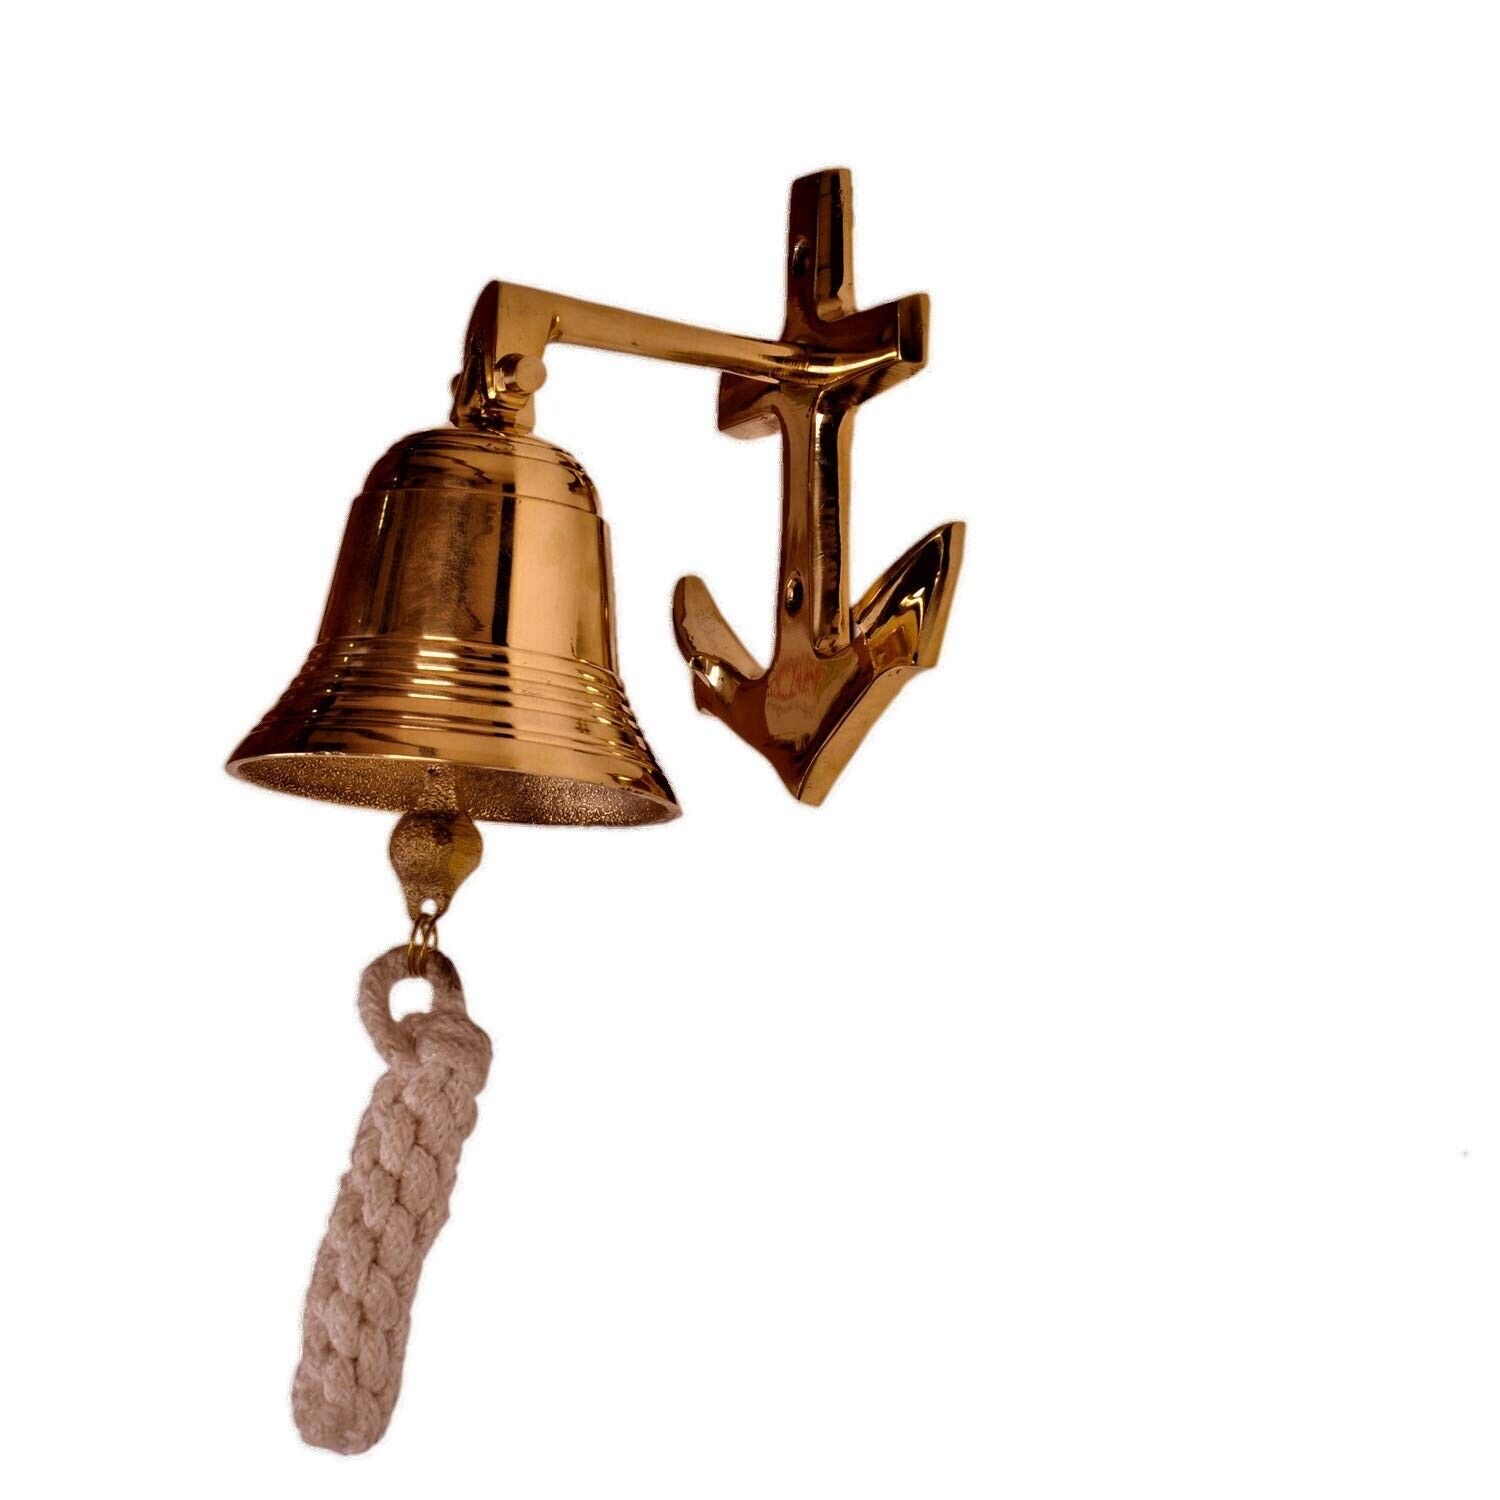 Brass Nautical Bell with Anchor Mount: Unique Pirate Ship Marine Decor Gift